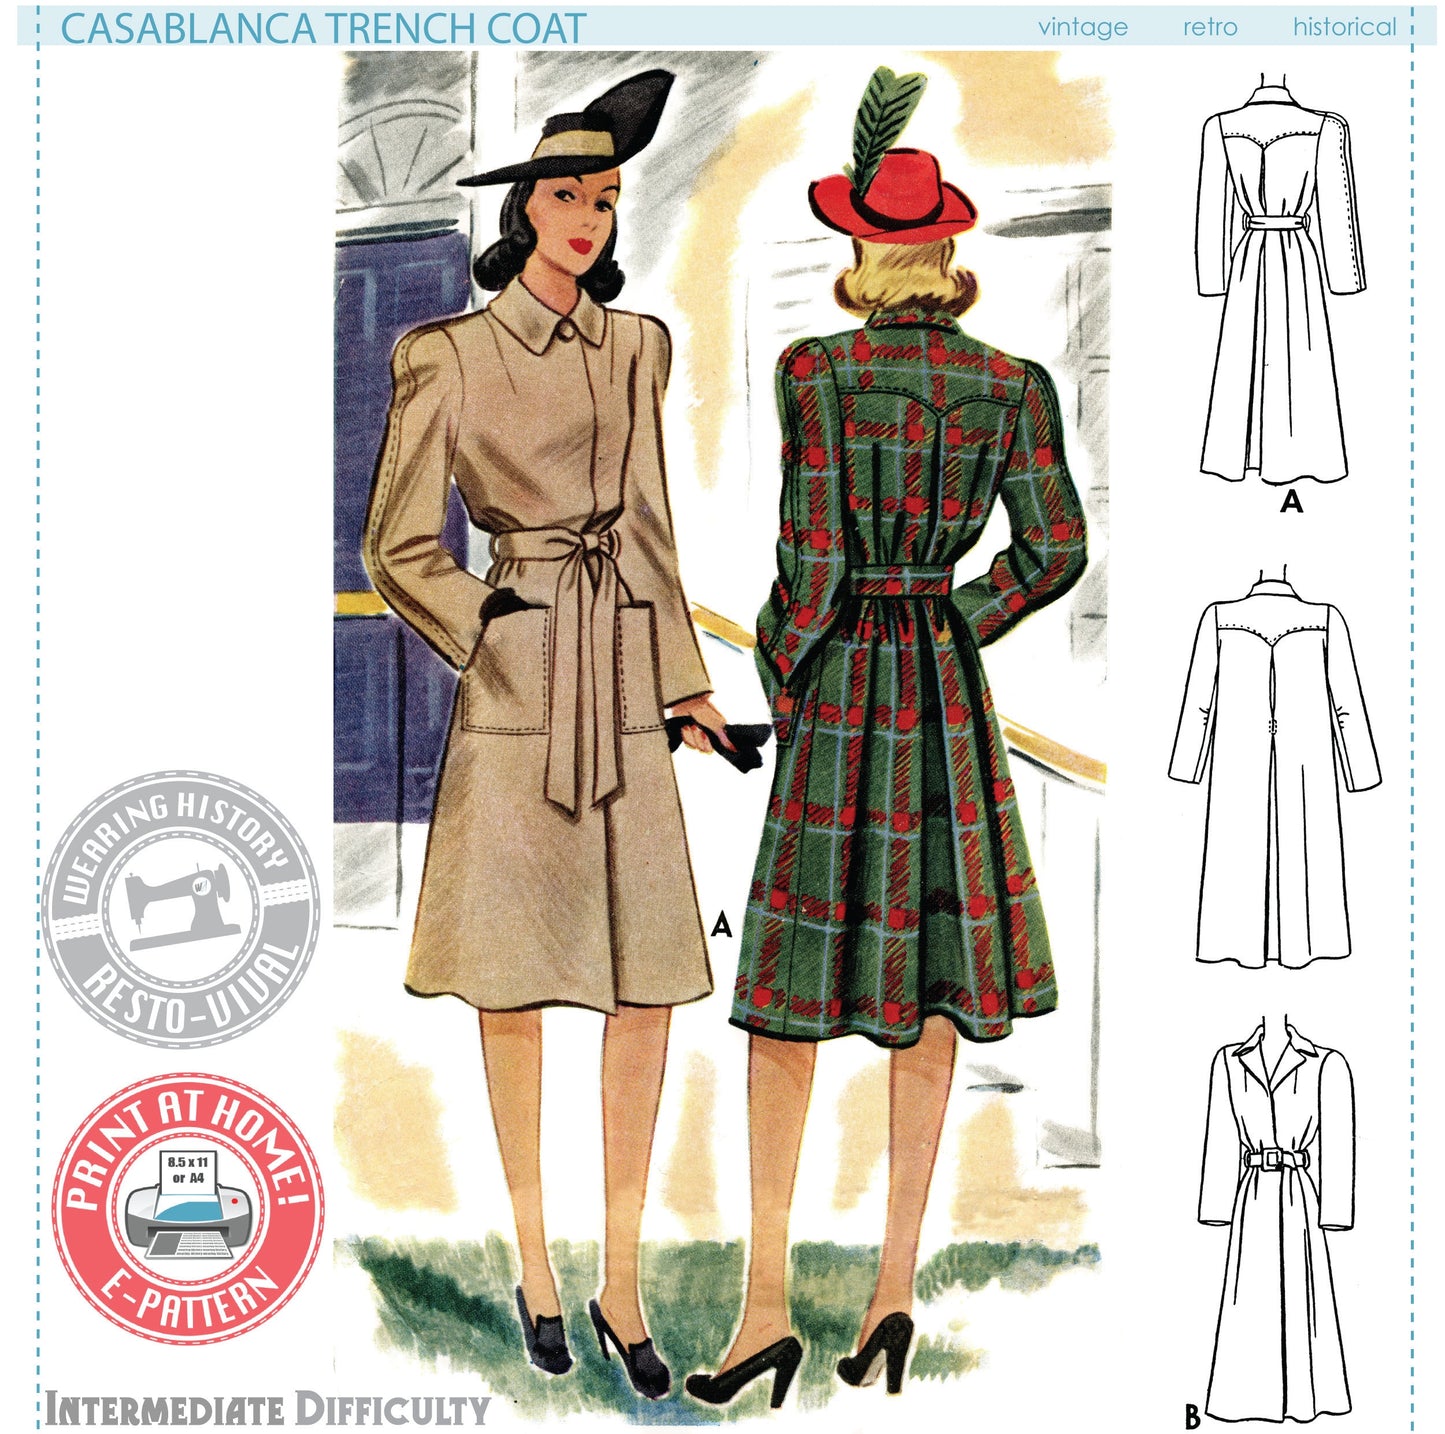 PRINTED PATTERN- 1940s "Casablanca" Trench Coat Pattern- Sizes 30-46" Bust